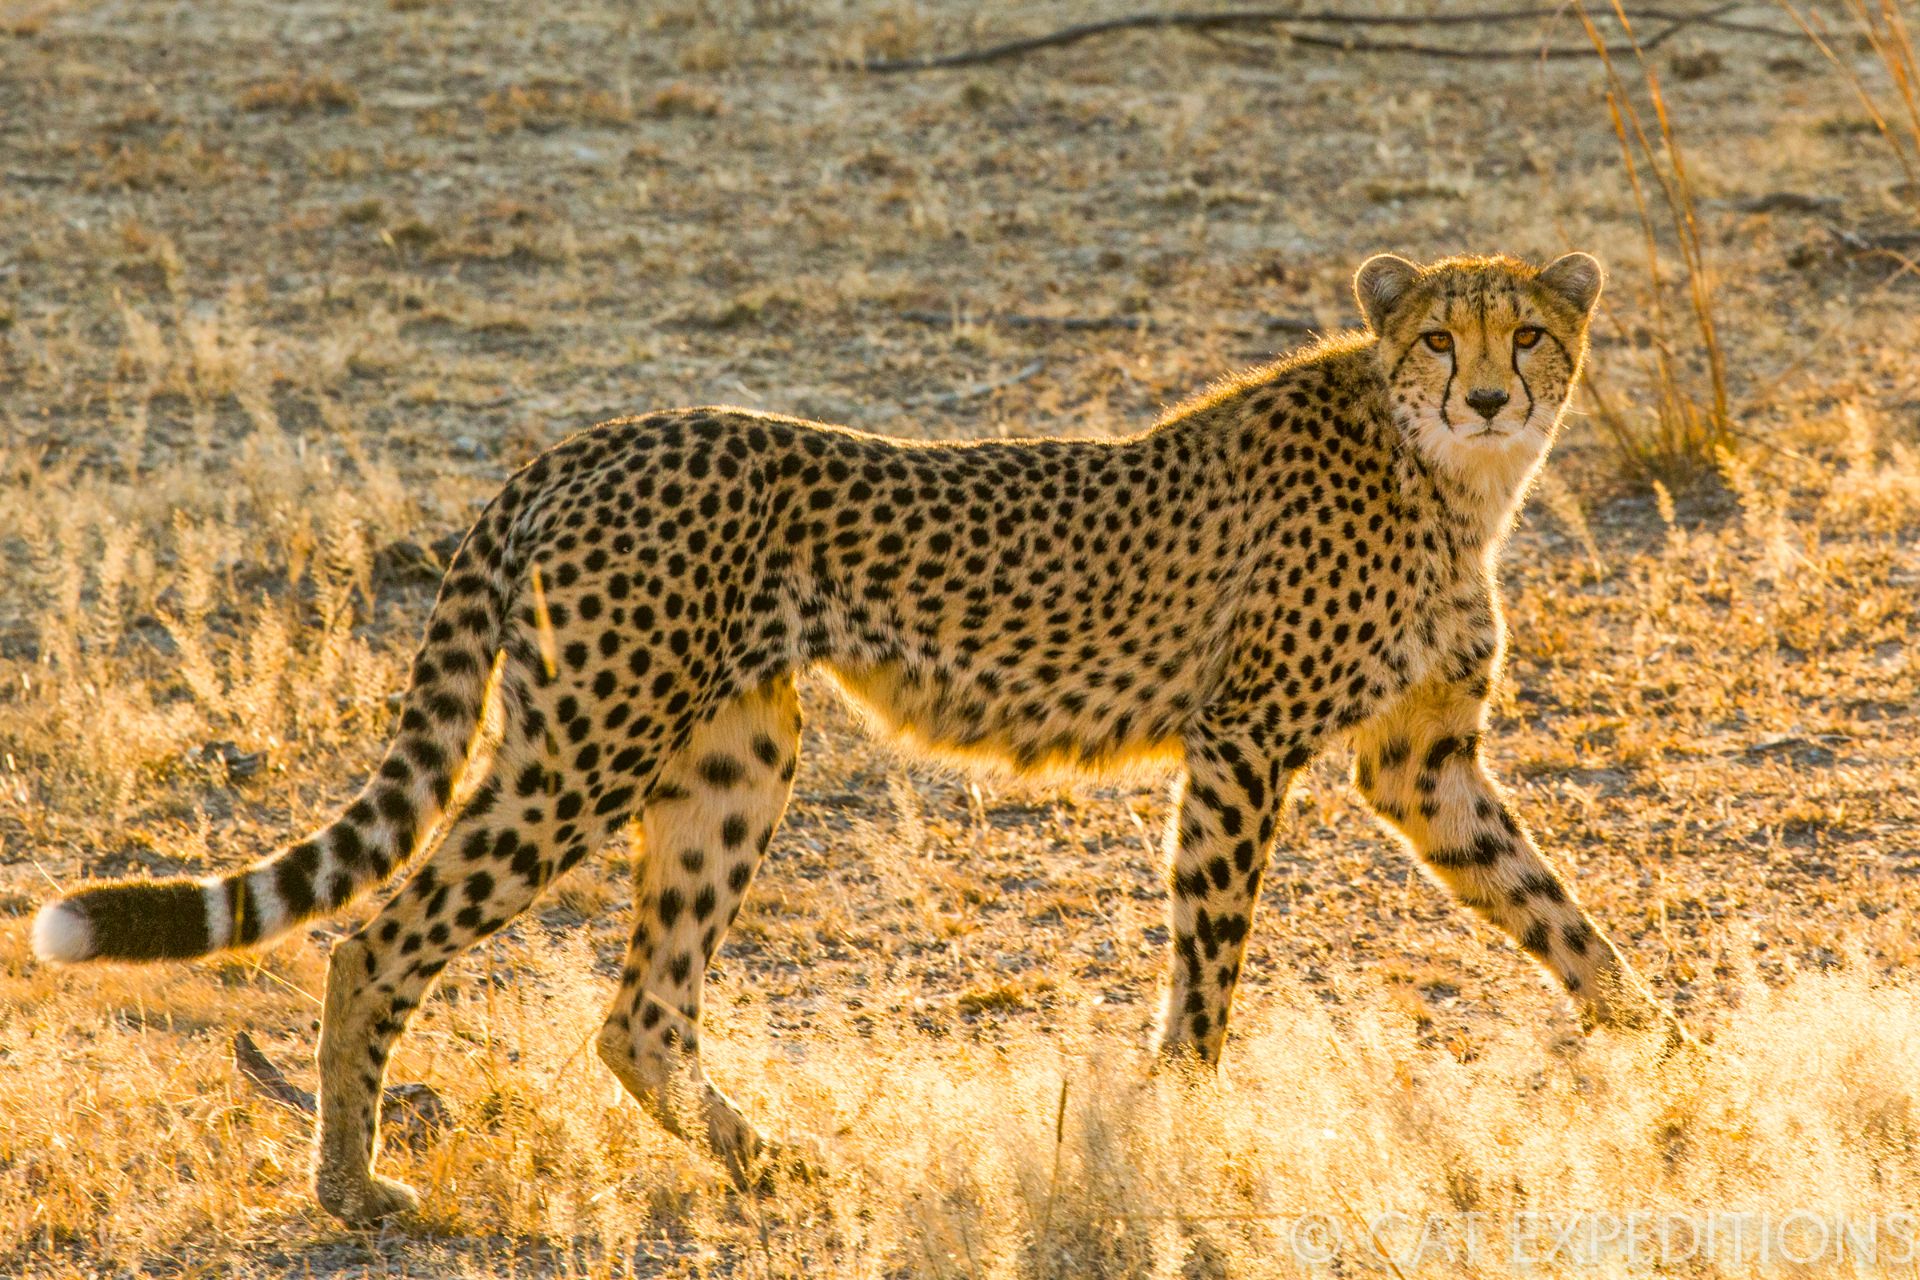 Cool cat - cheetah finds shade on top of safari jeep 